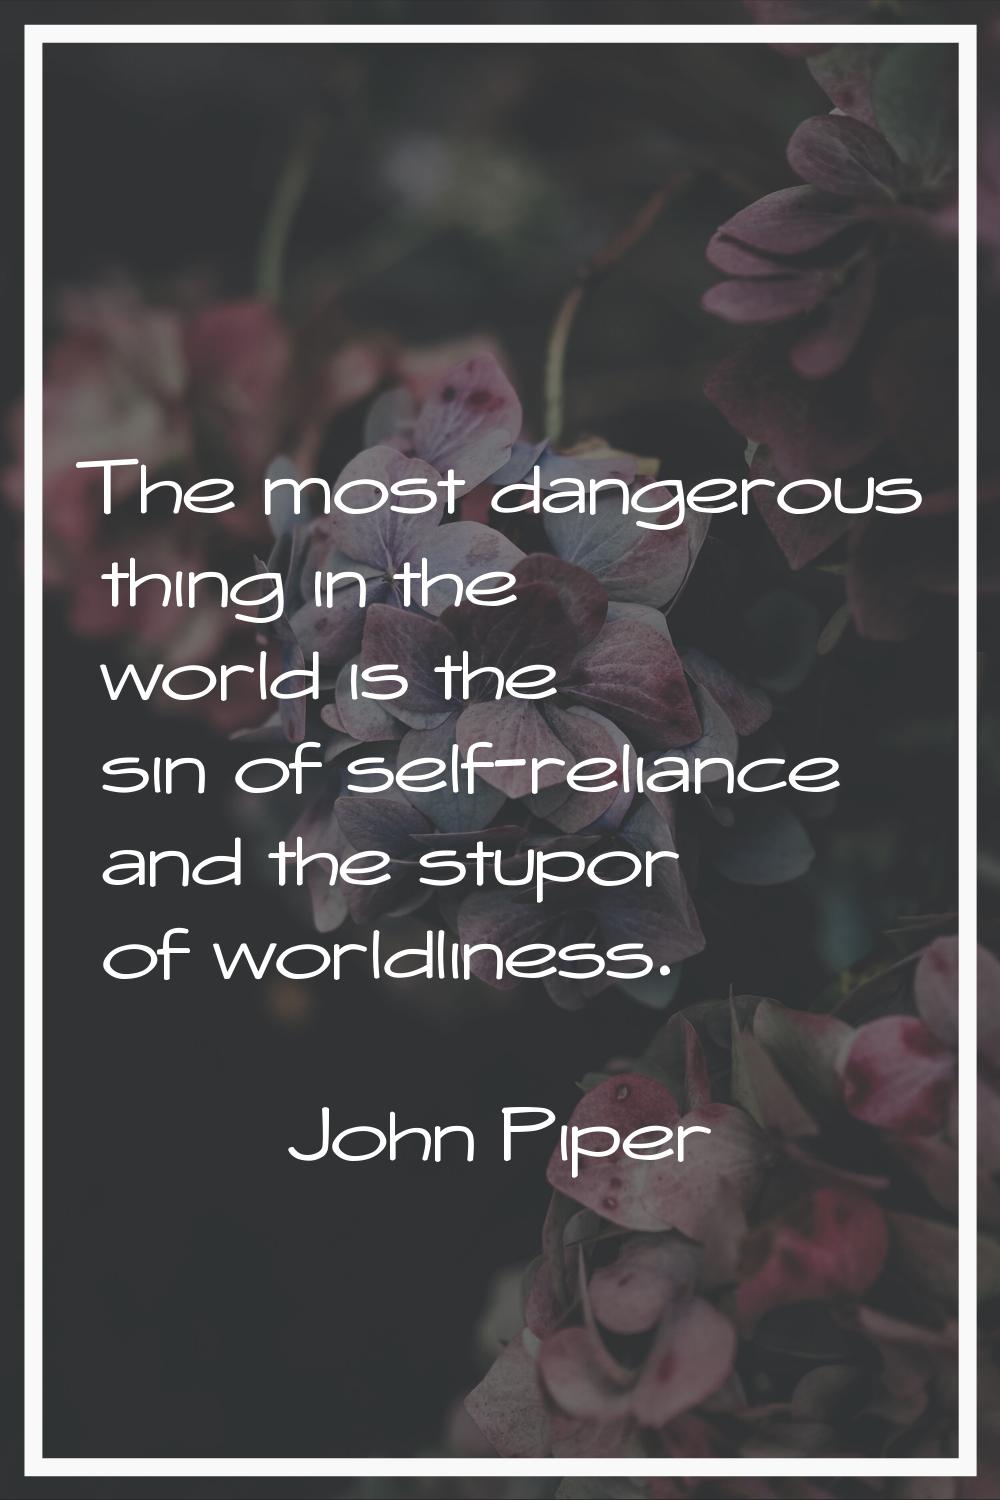 The most dangerous thing in the world is the sin of self-reliance and the stupor of worldliness.